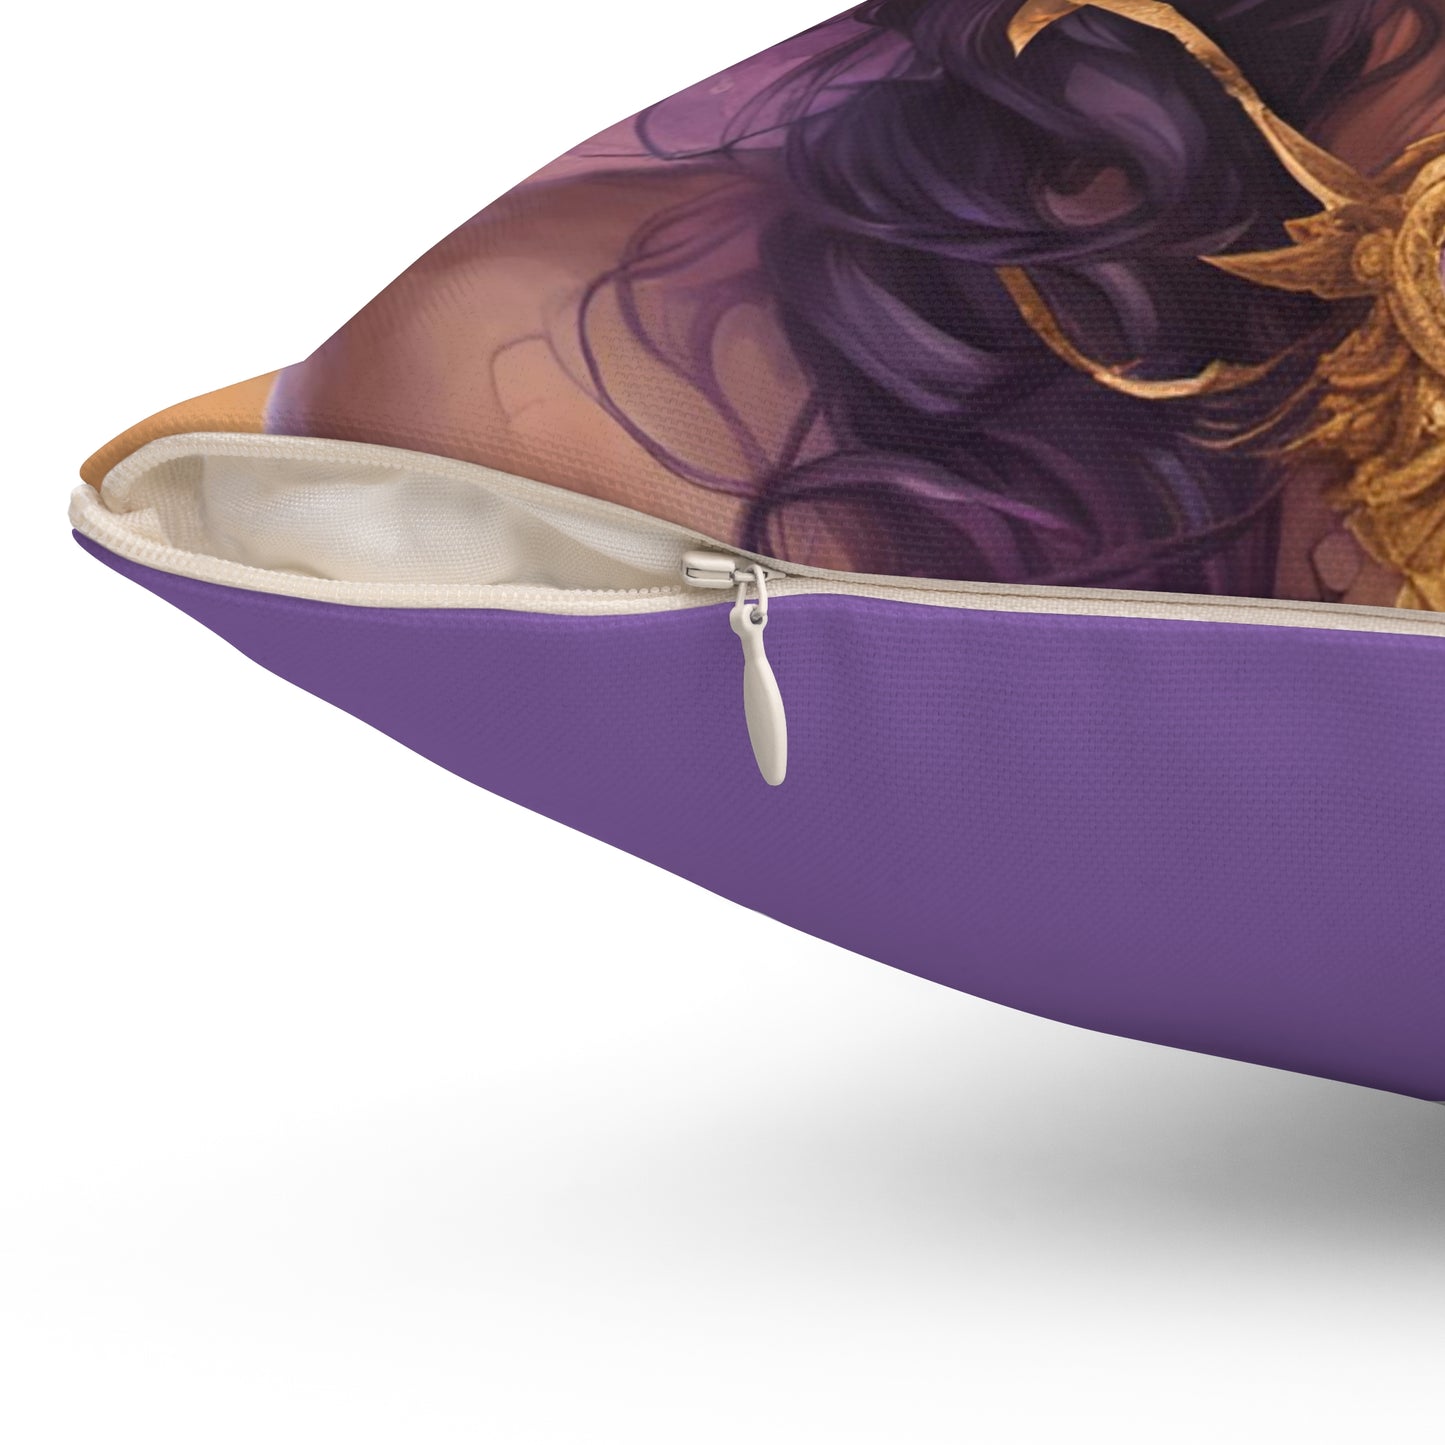 Crown Chakra Accent pillow